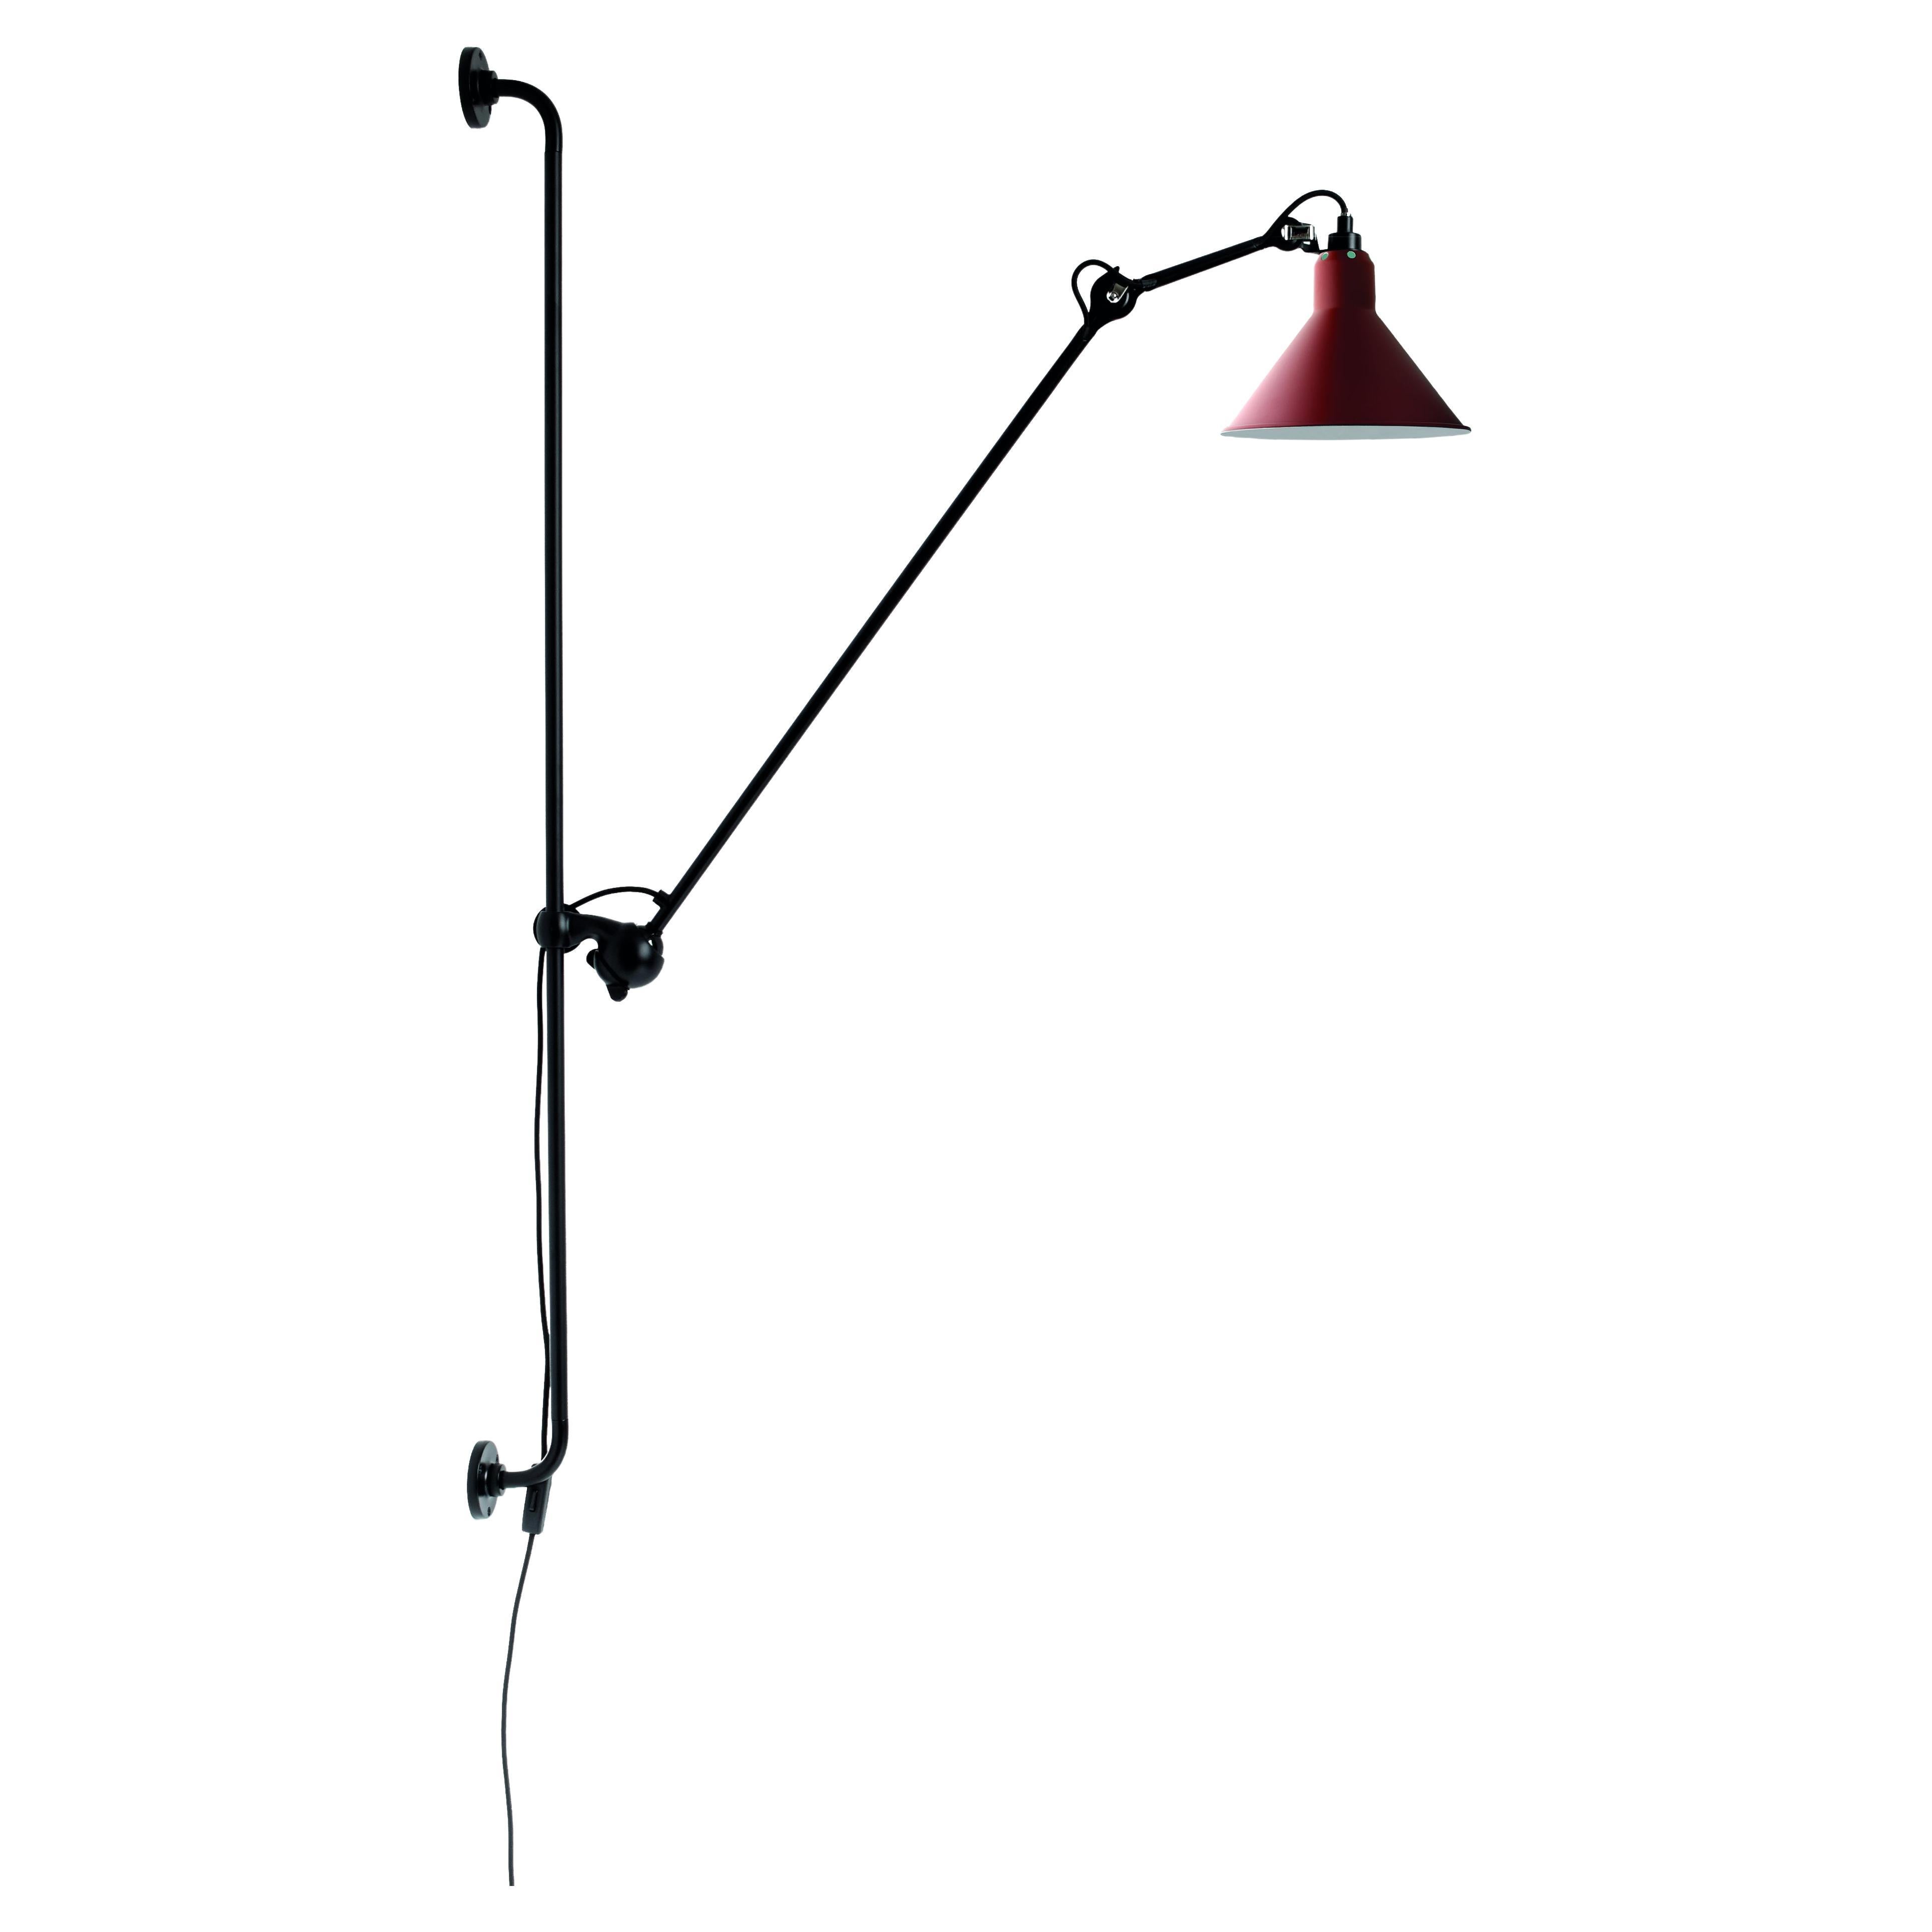 DCW Editions La Lampe Gras N°214 Conic Wall Lamp in Black Arm & Red Shade For Sale